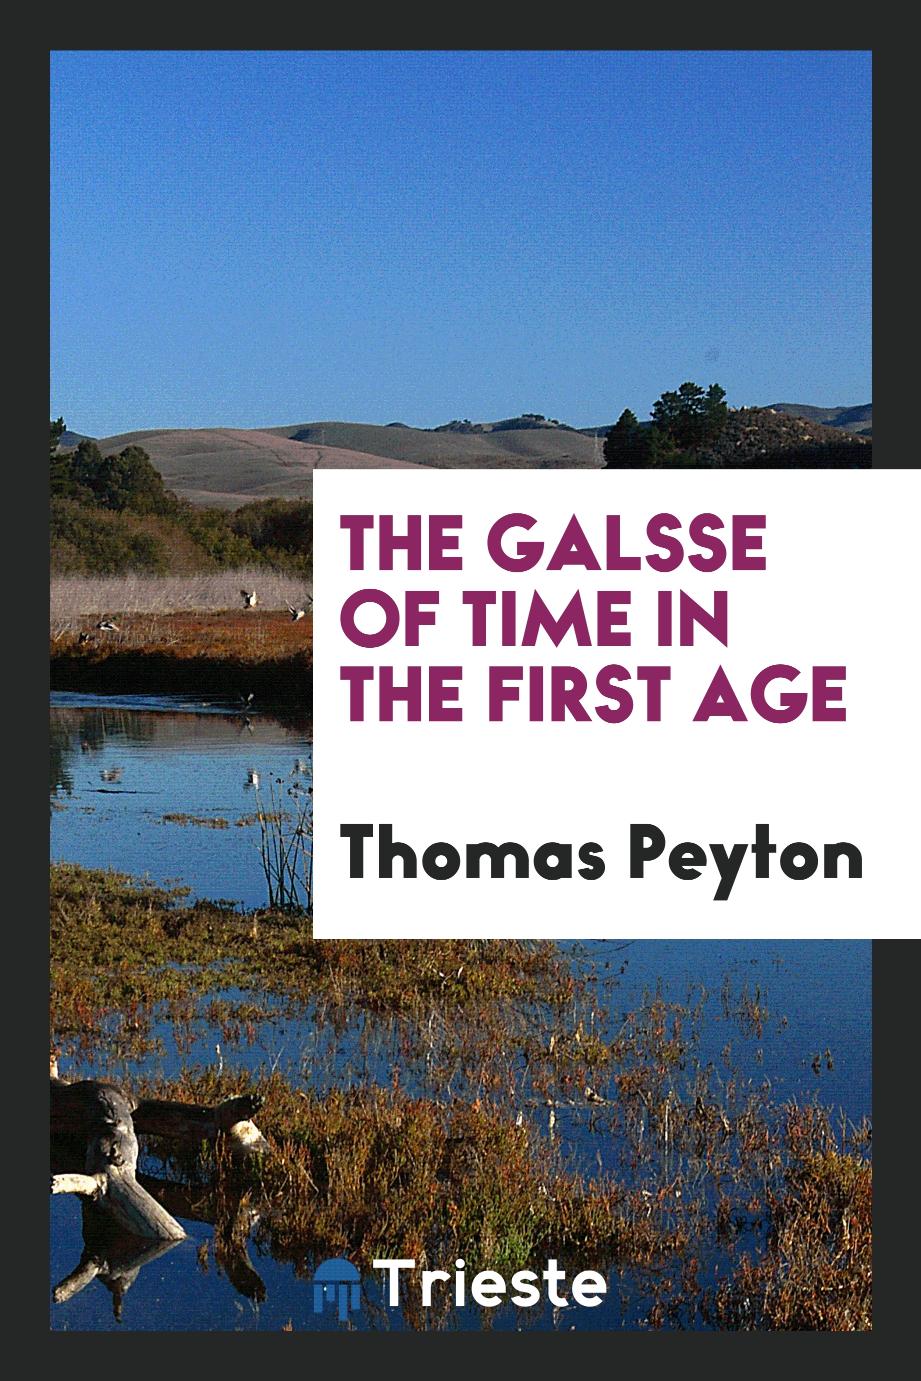 The Galsse of Time in the First Age